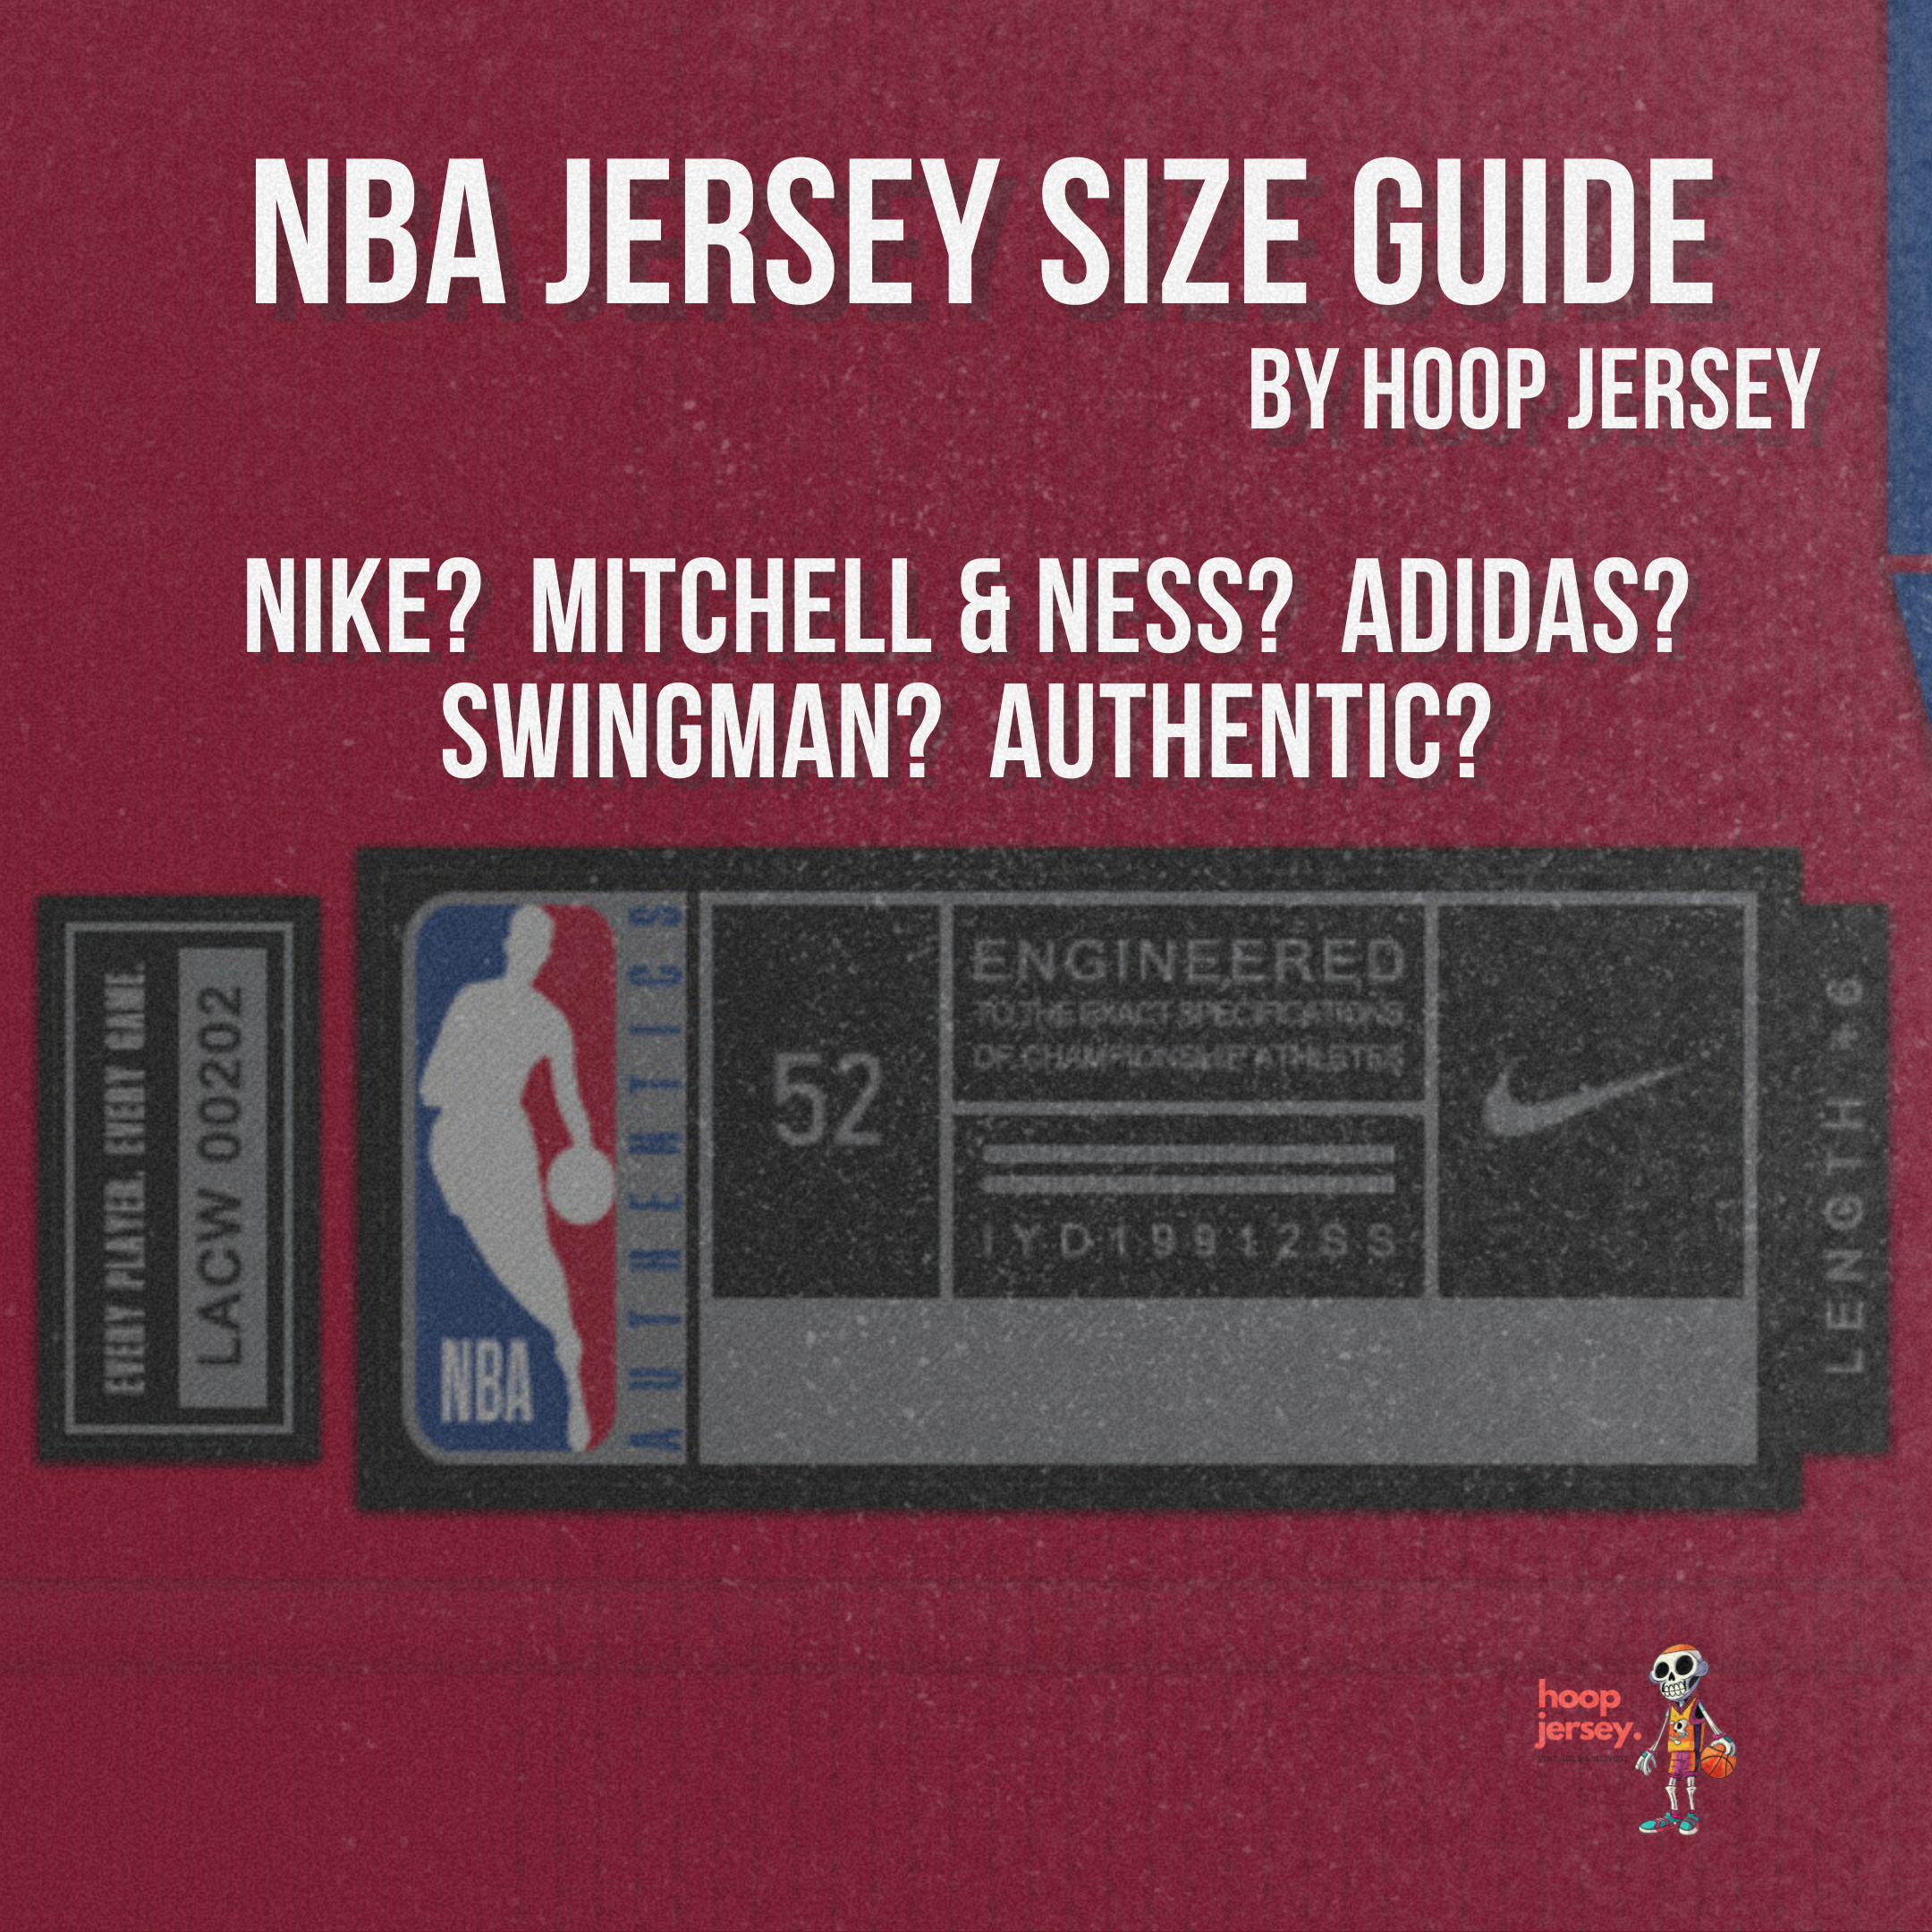 Detail Size Guide to NBA Jersey - Hoop Jersey Store